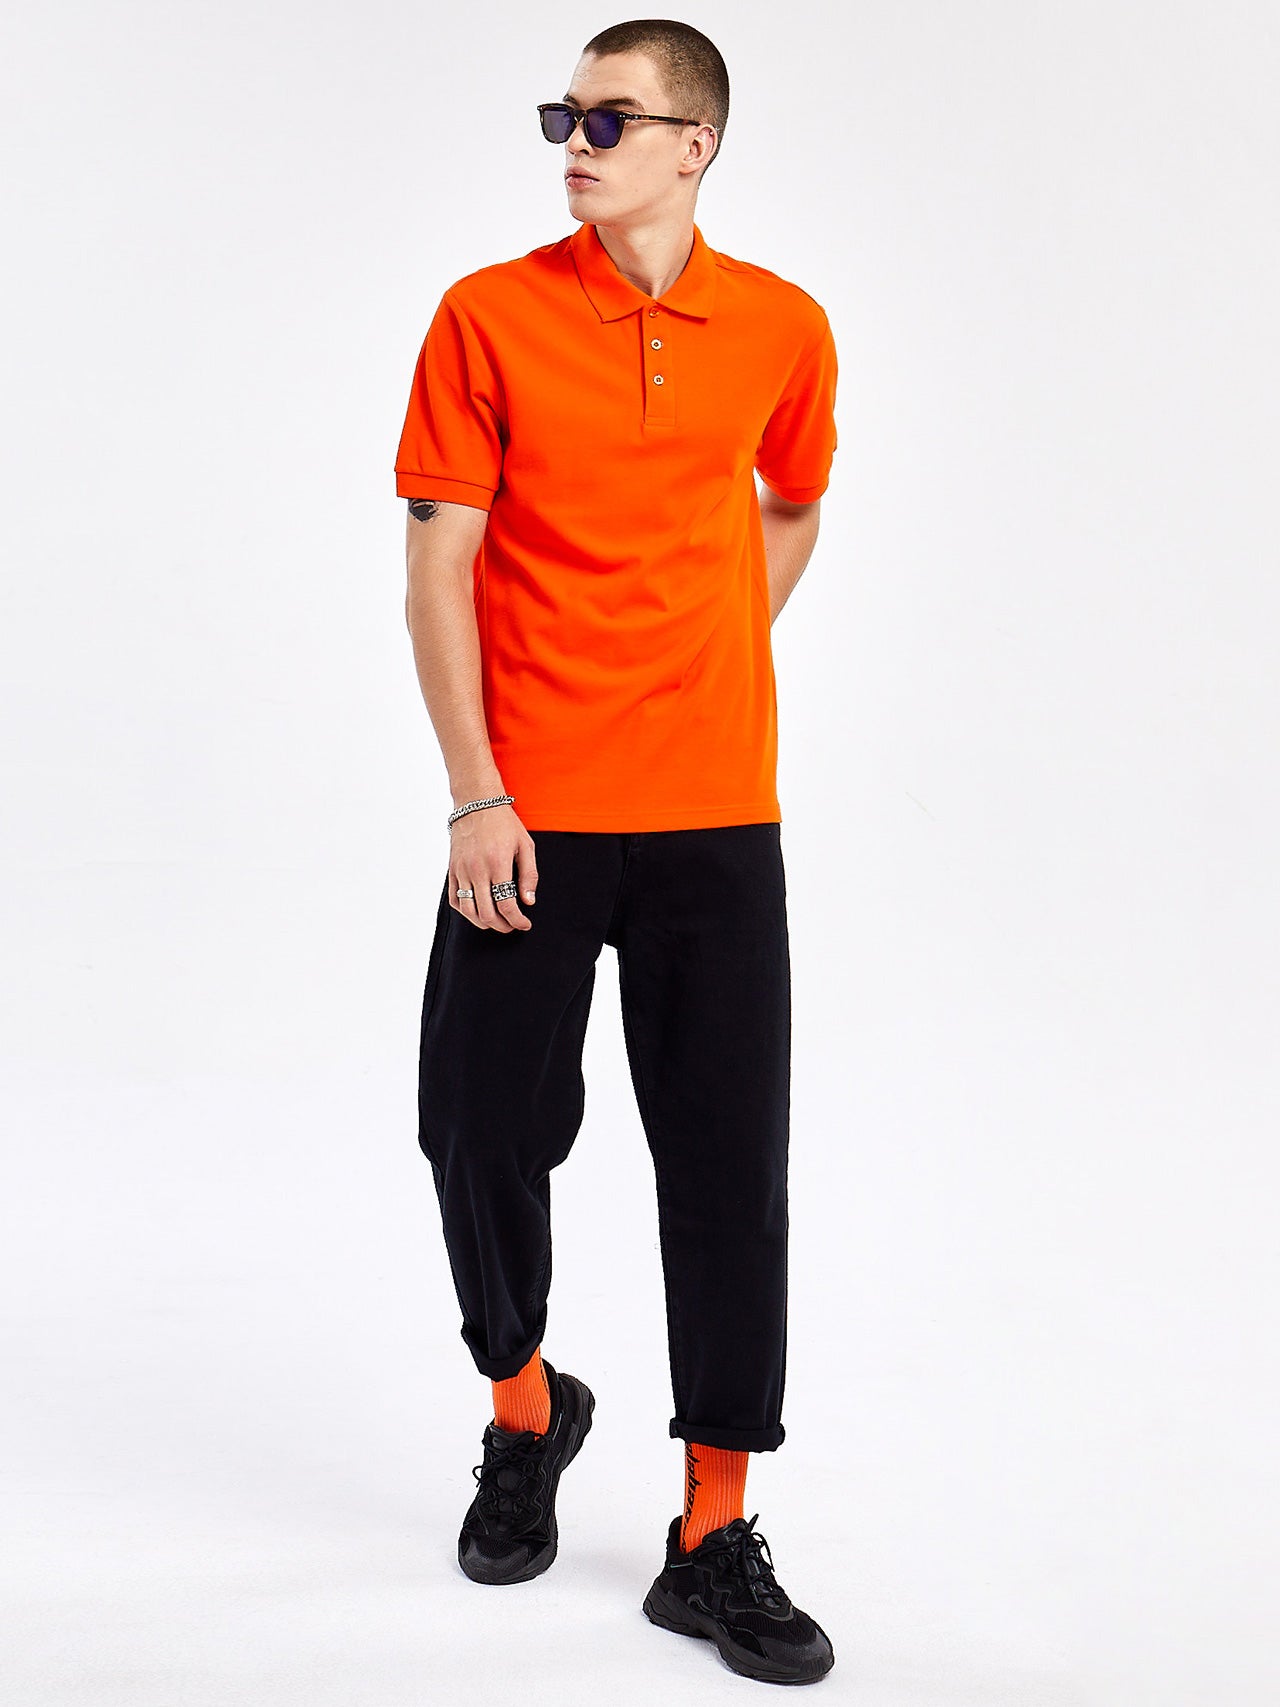 Smart look Cotton Polo T-Shirts for Summers